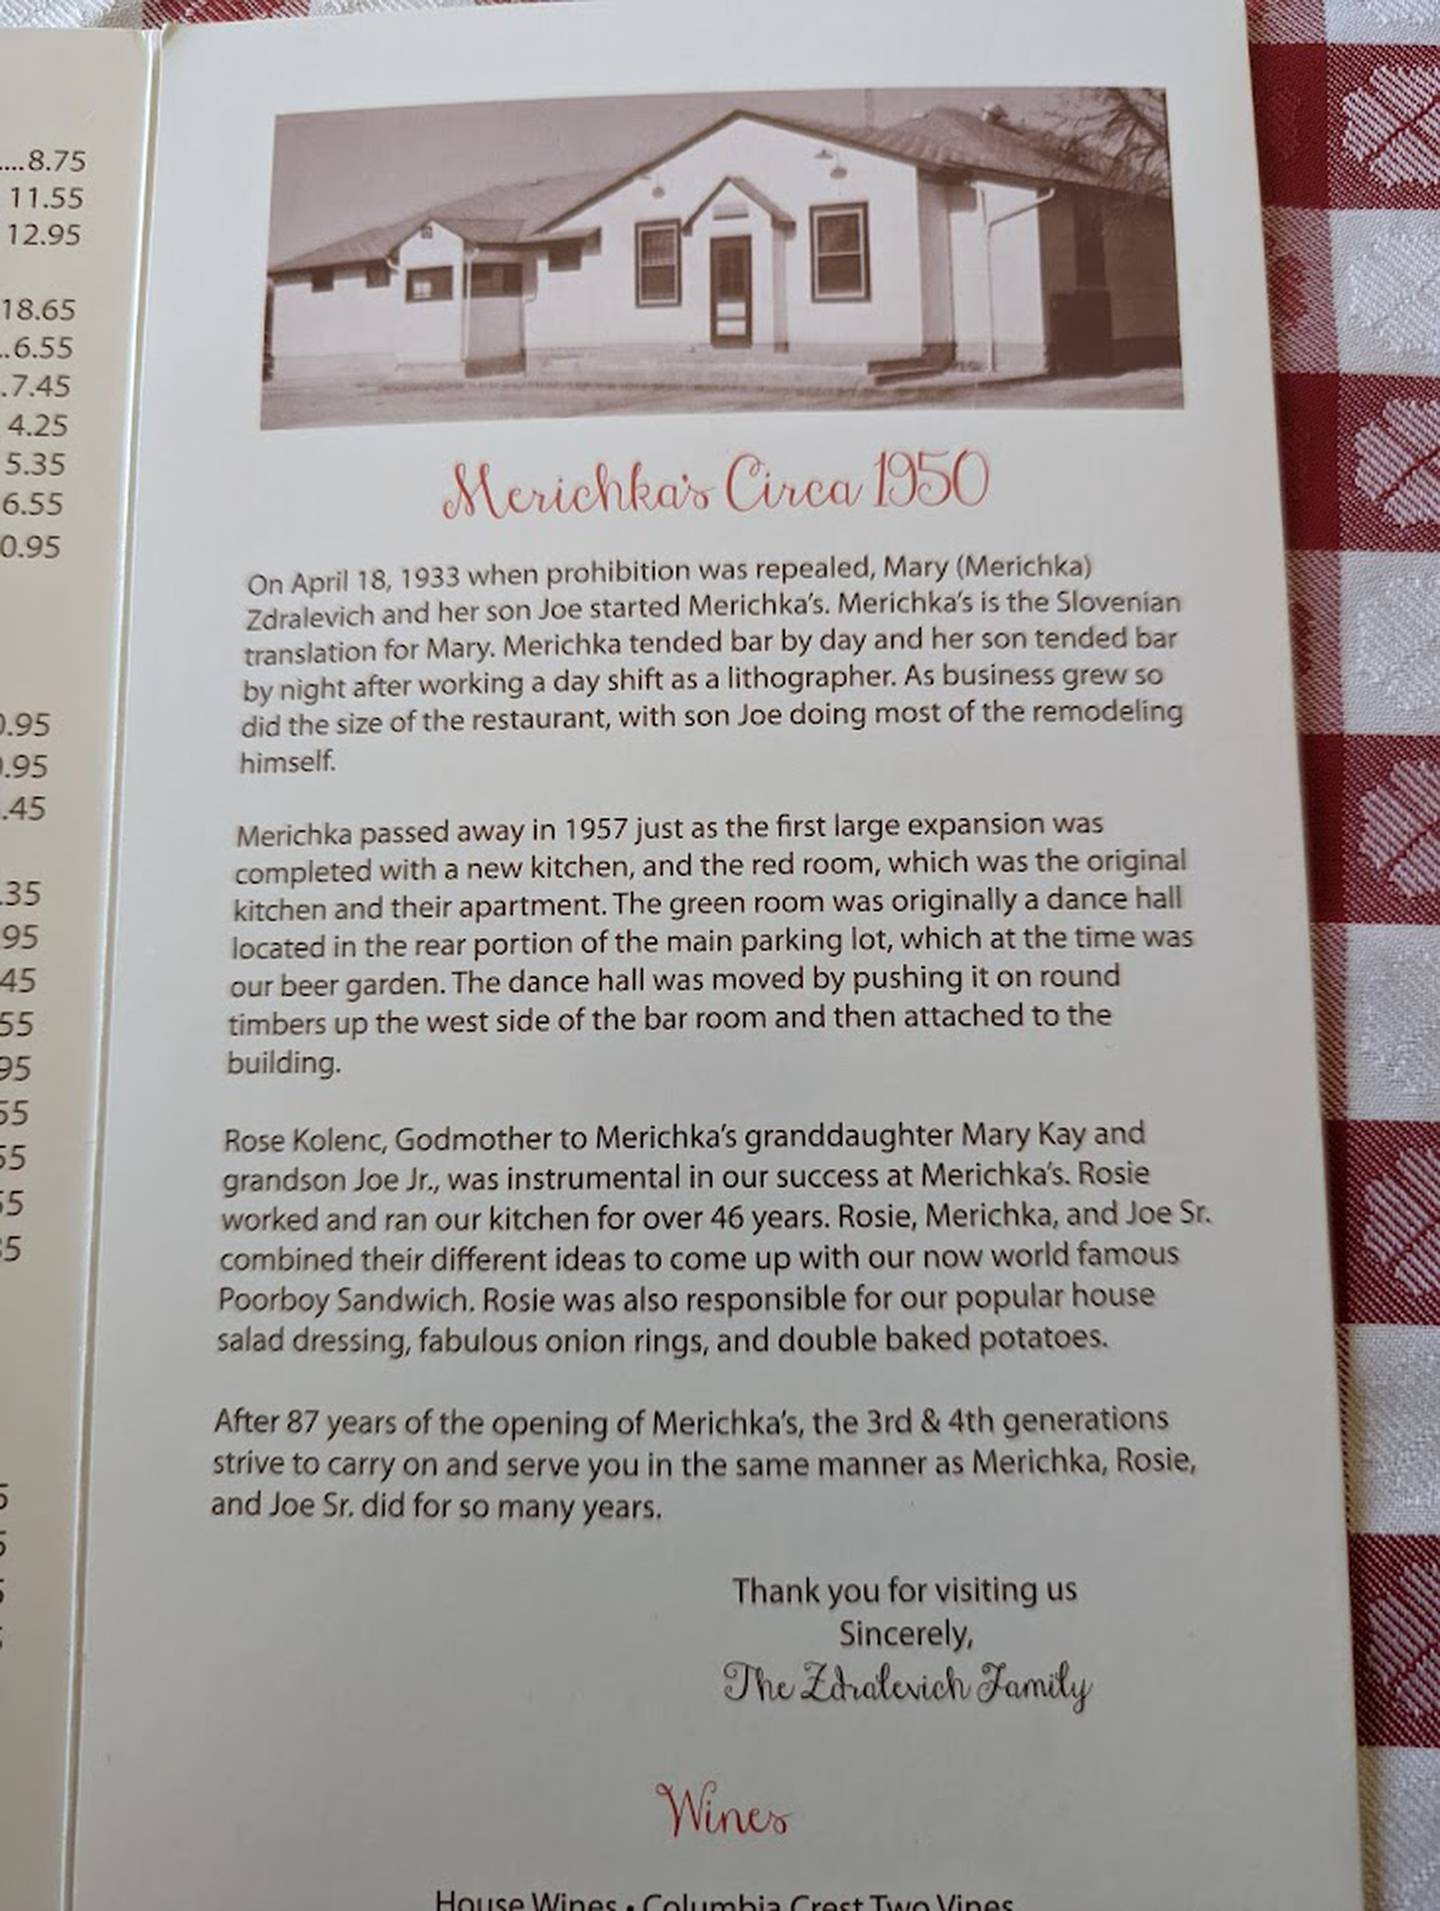 Mary (Merichka) Zdralevich and her son Joe opened Merichka’s on April 18, 1933, and the Zdralevich family still owns and operates the Crest Hill restaurant. Merichka's is known for its poorboy sandwich with garlic butterine.